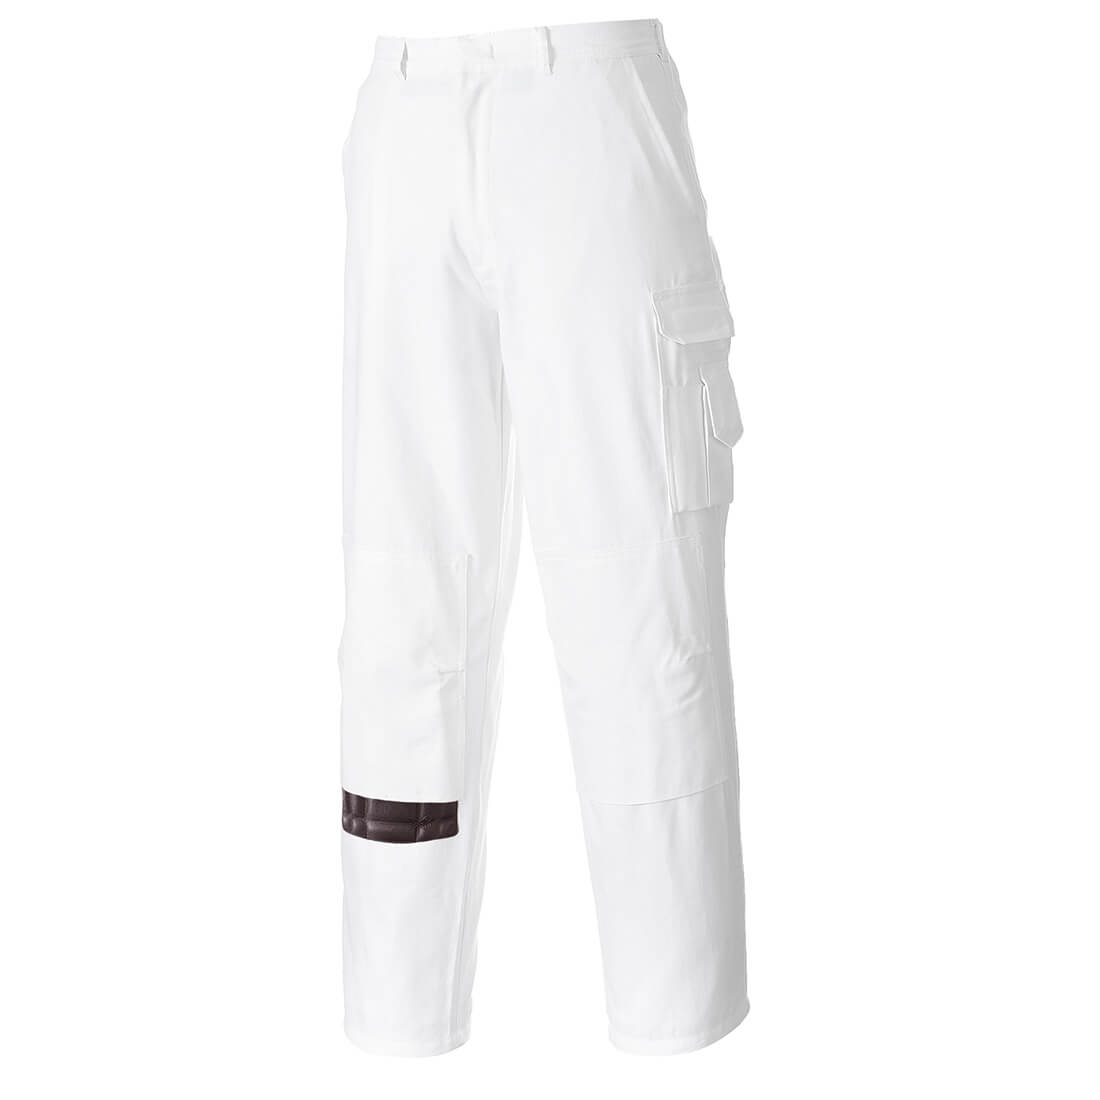 Image of Portwest Painters Trousers White 4XL 31"